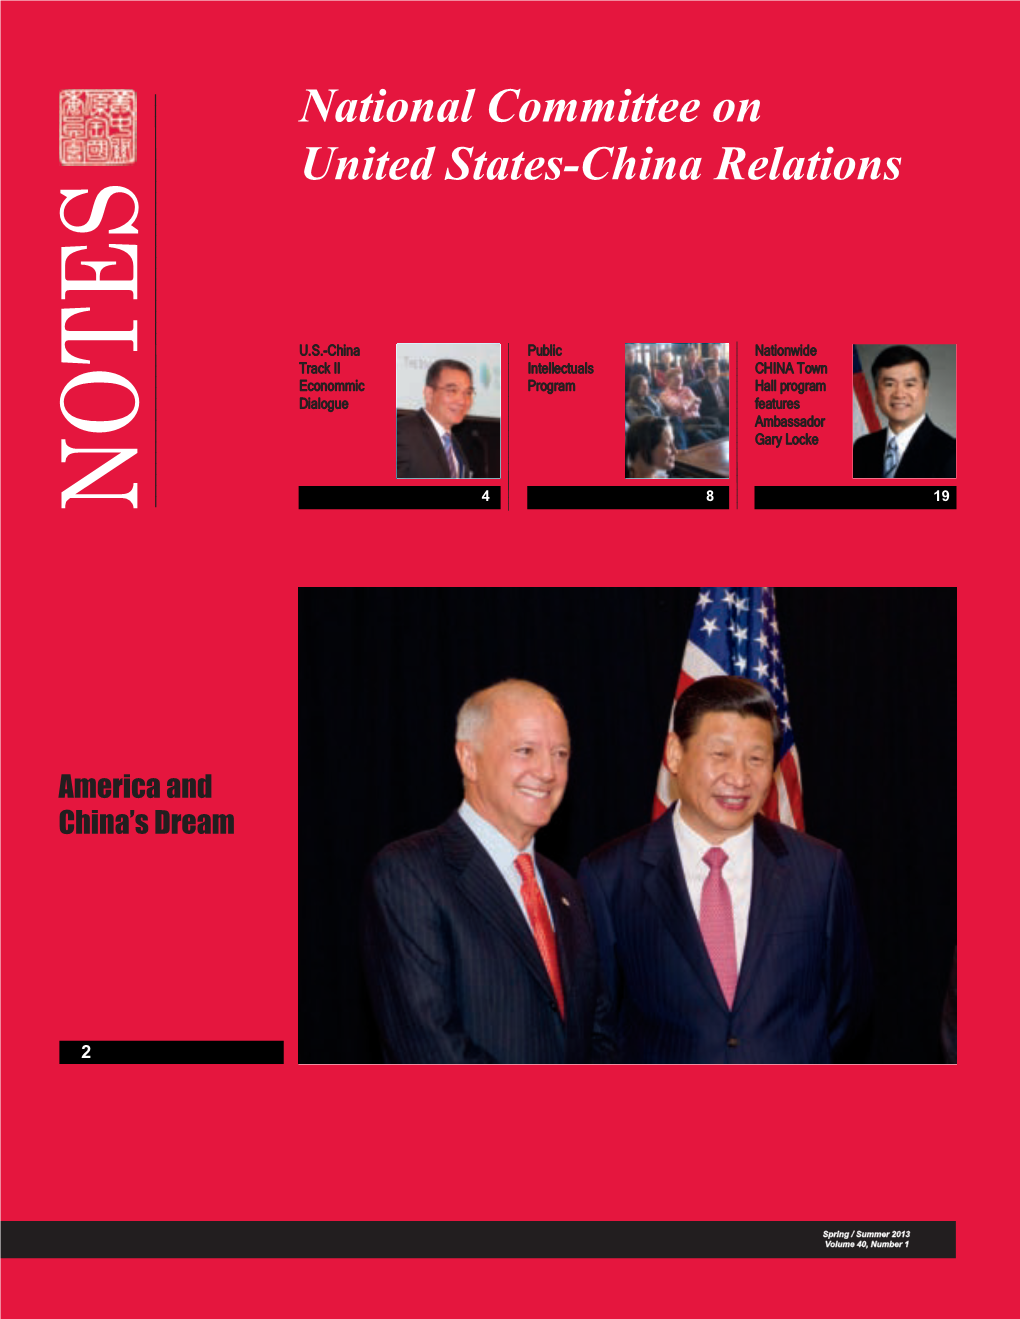 National Committee on United States-China Relations